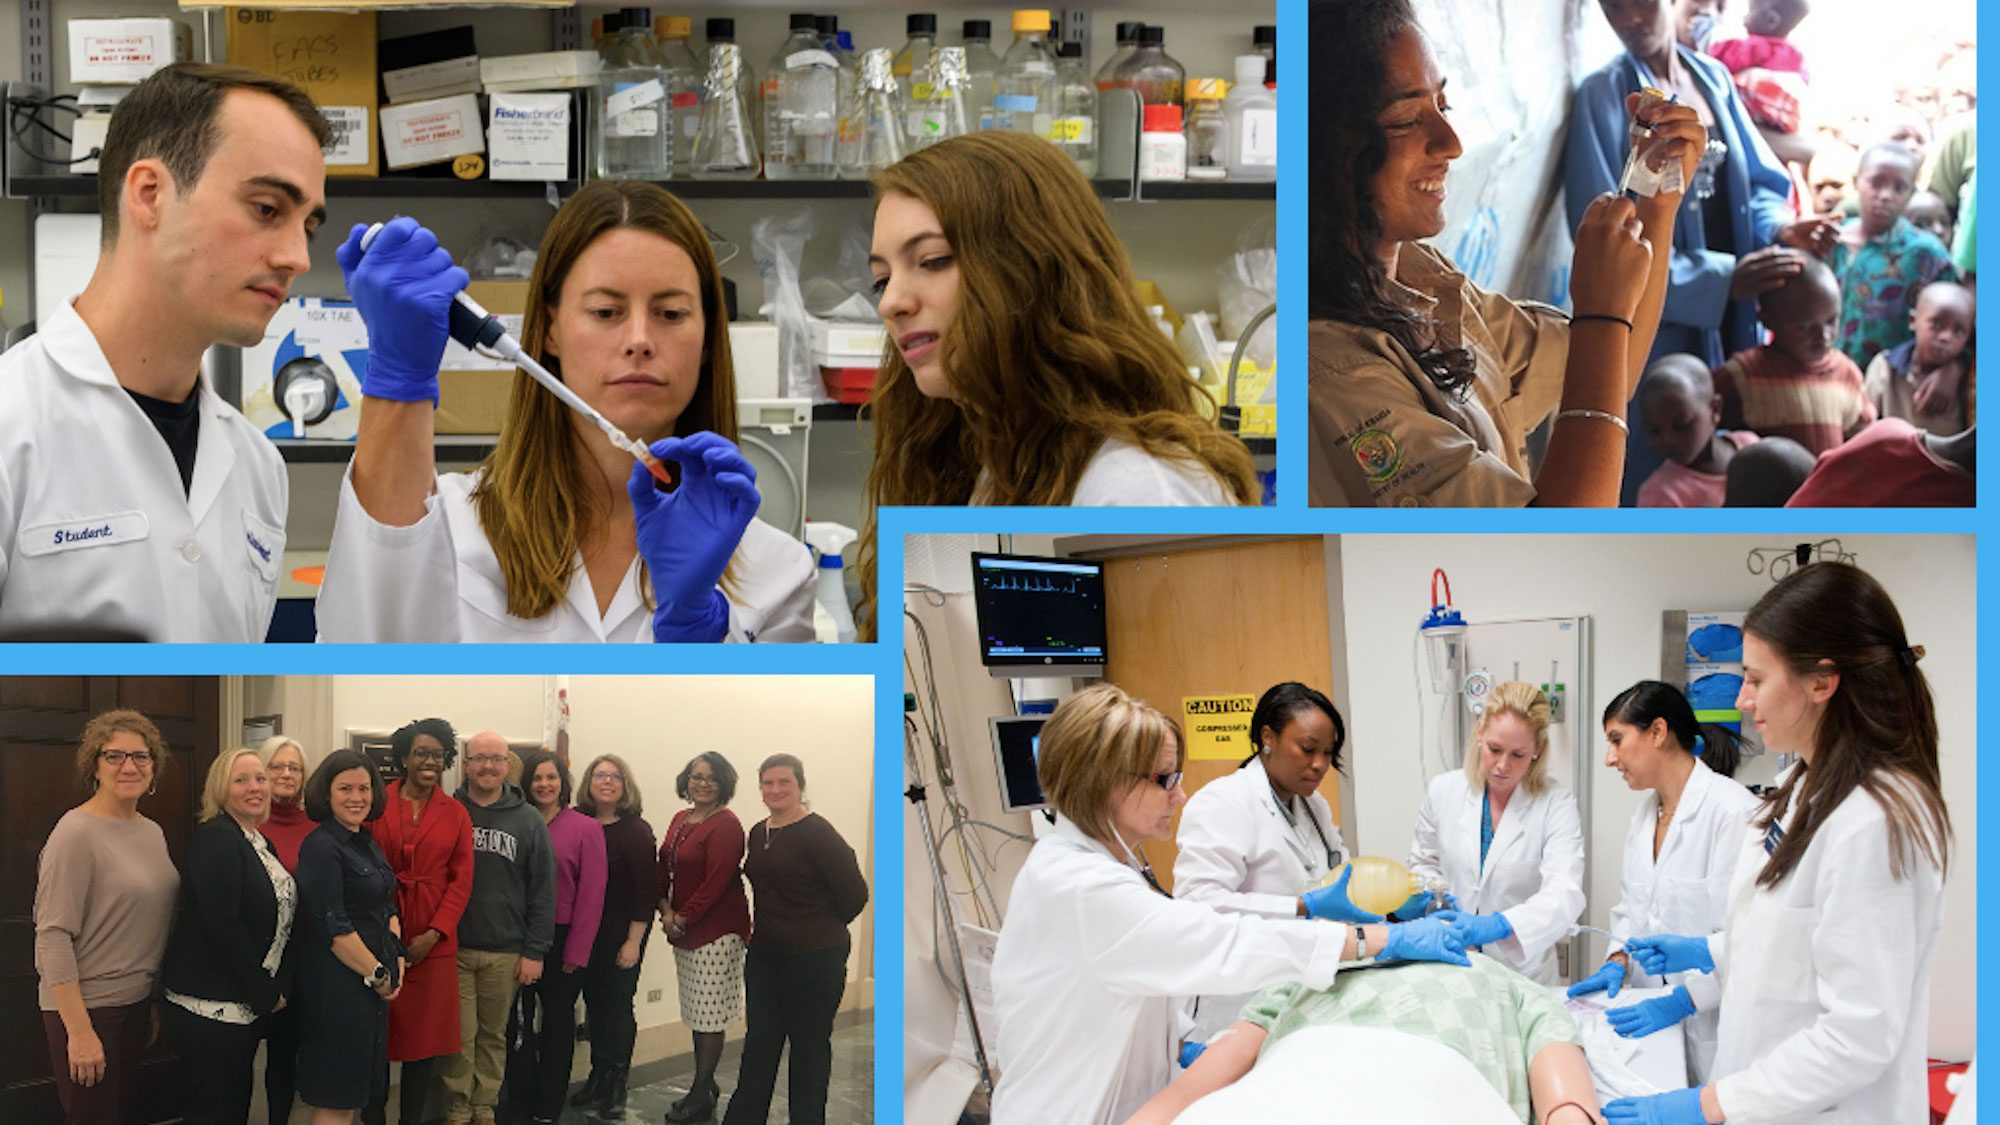 A collage of photos show students working in the labs and caring for patients.